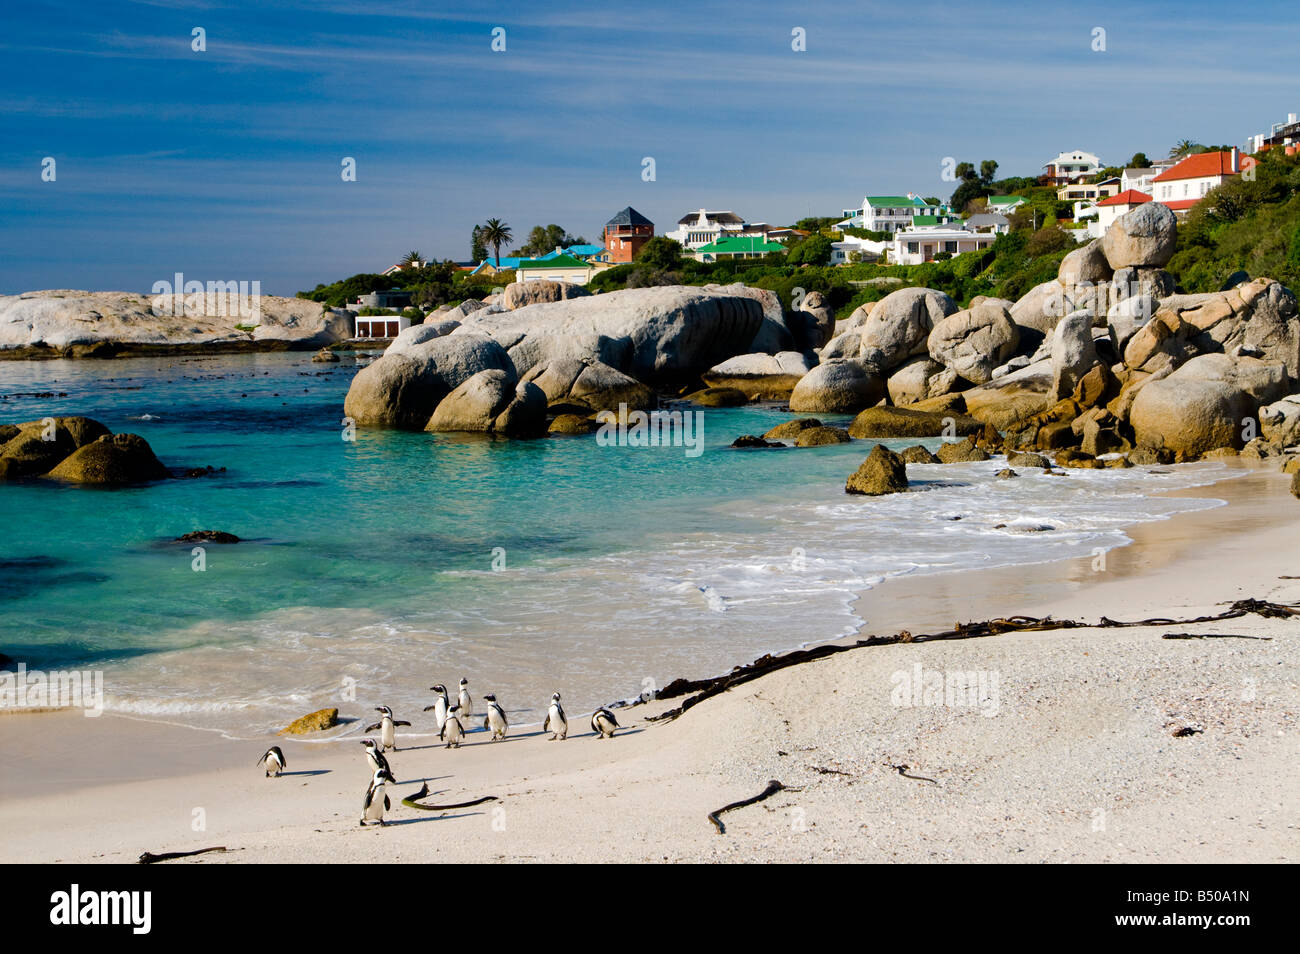 African penguins, Boulders beach, Simons Town, Western Cape, South Africa Stock Photo